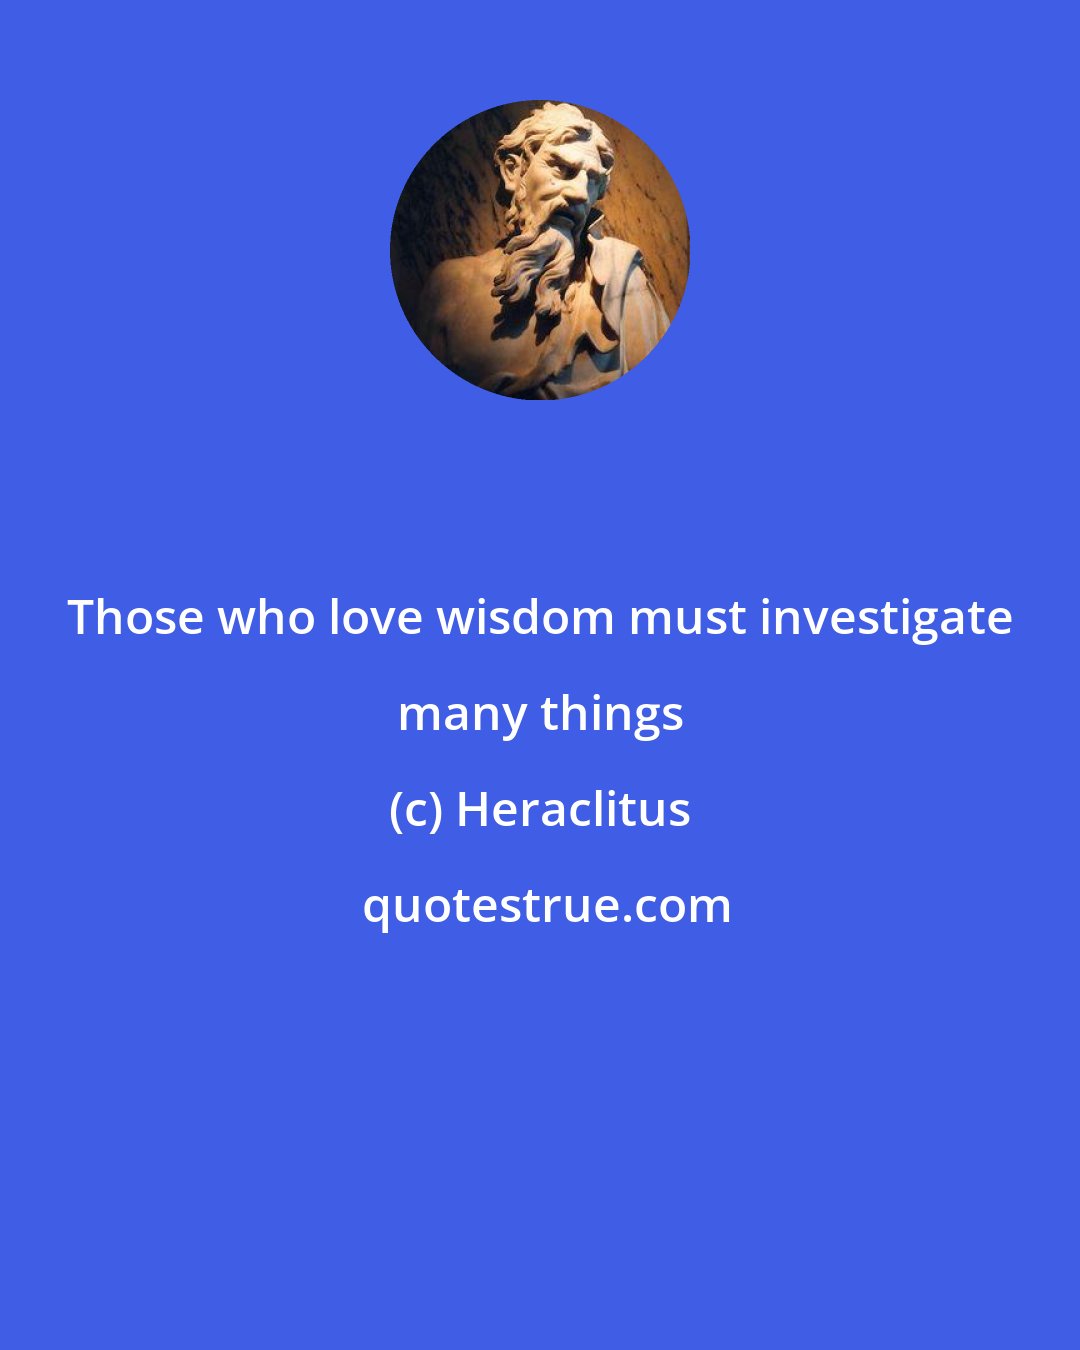 Heraclitus: Those who love wisdom must investigate many things